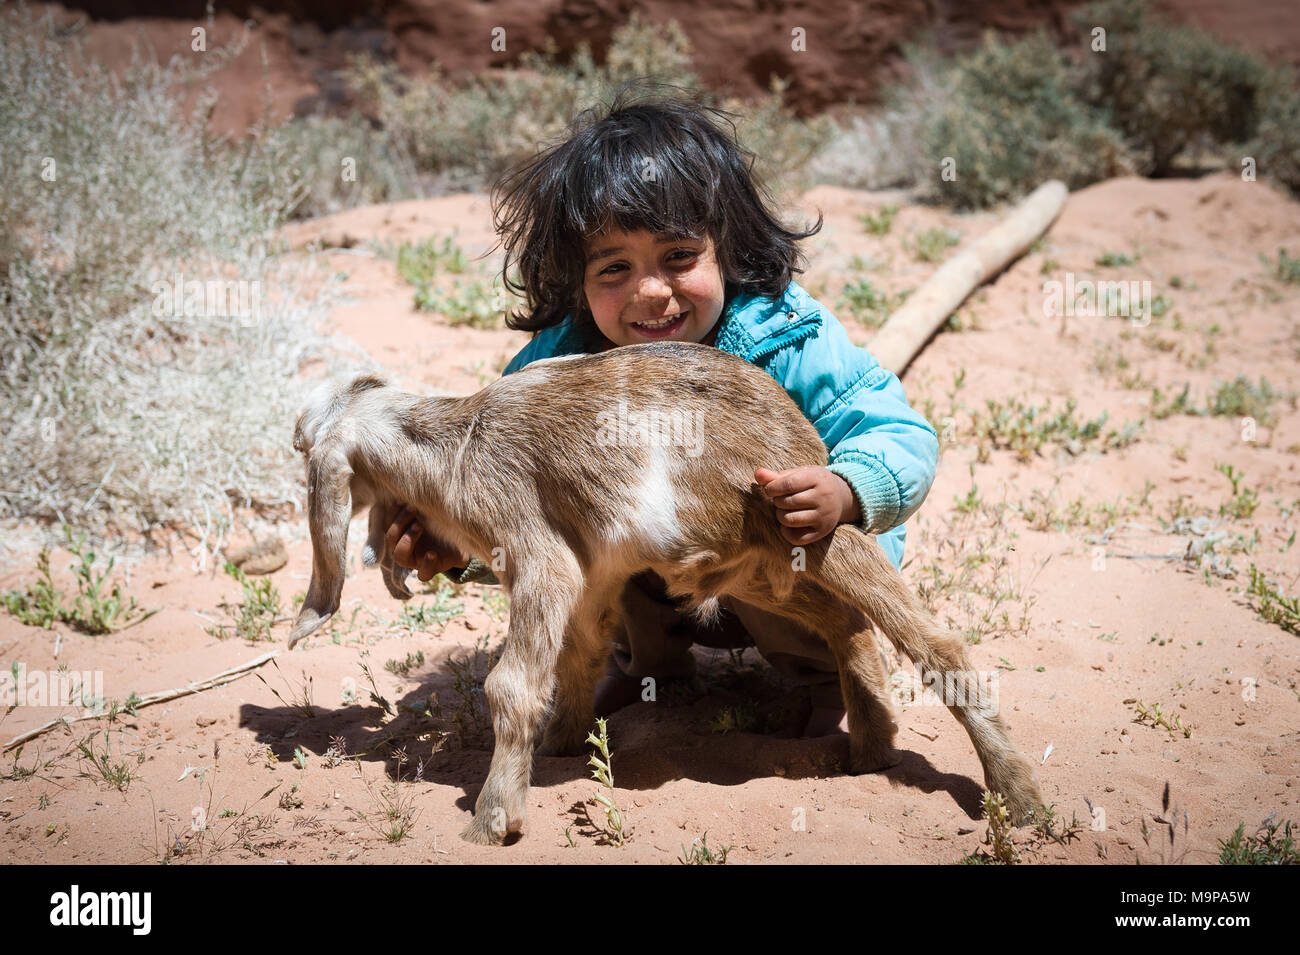 Young Bedouin girl playing with baby goat in the Wadi Rum desert near the border of Saudi Arabia. Stock Photo